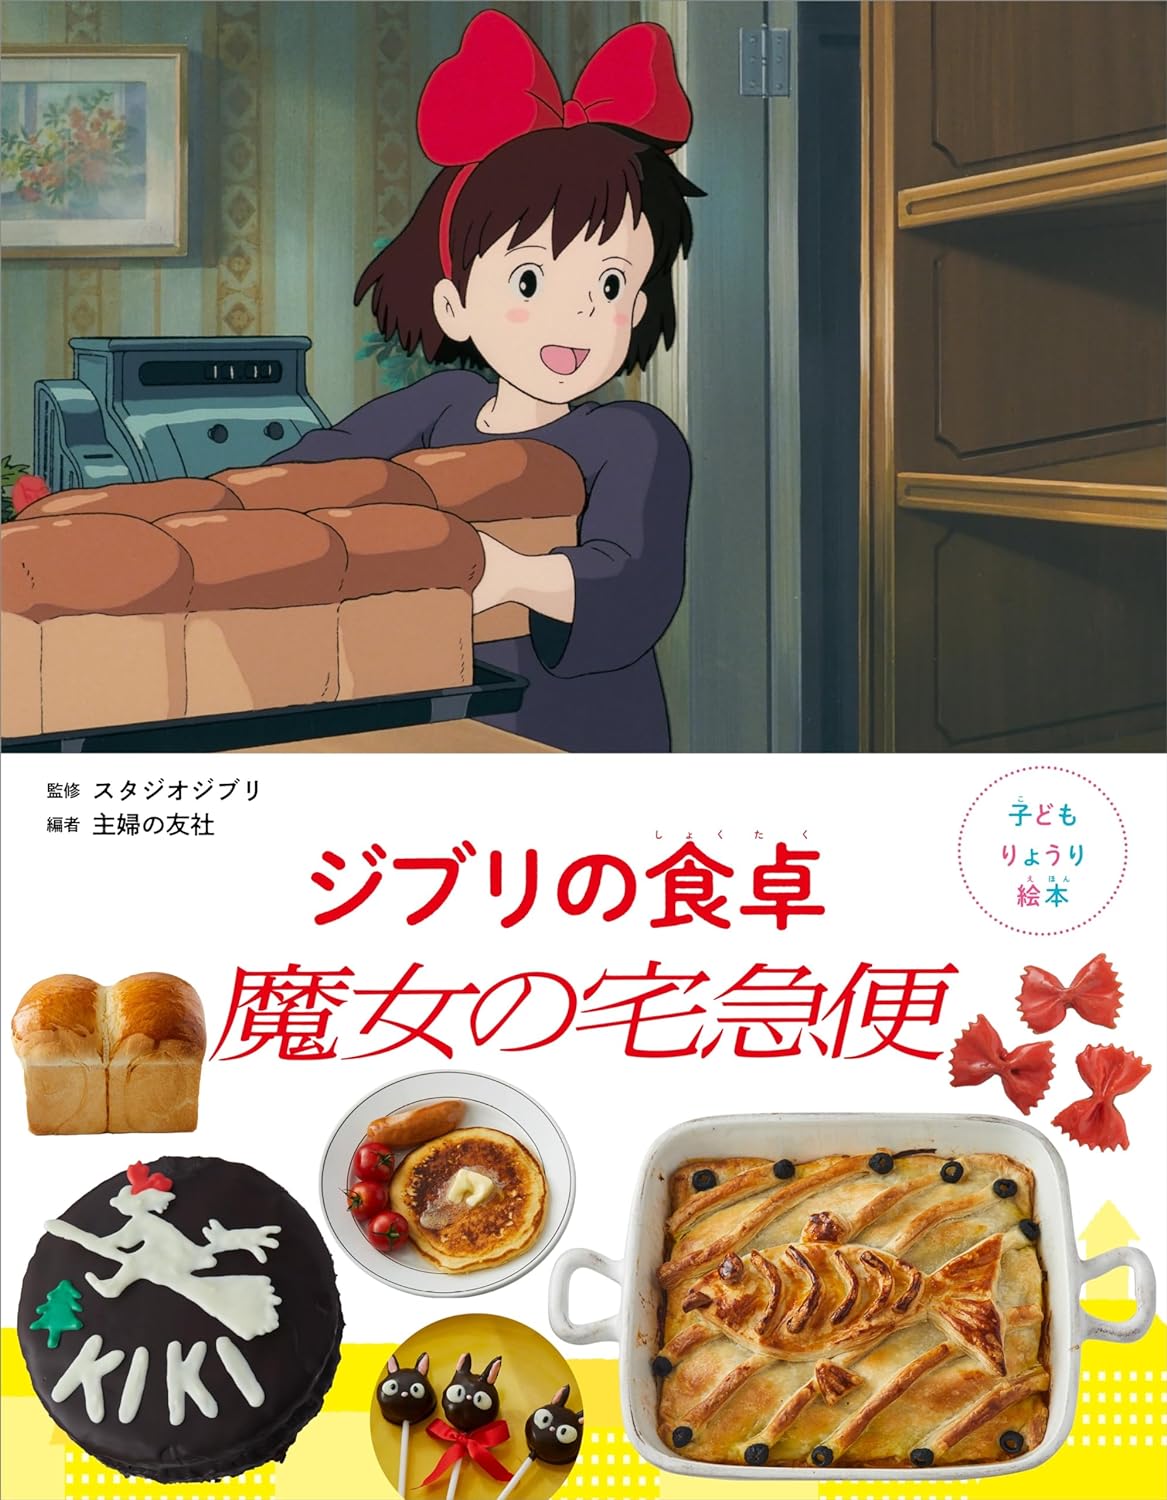 ghiblis-dining-table-kikis-delivery-service-kochbuch.jpg